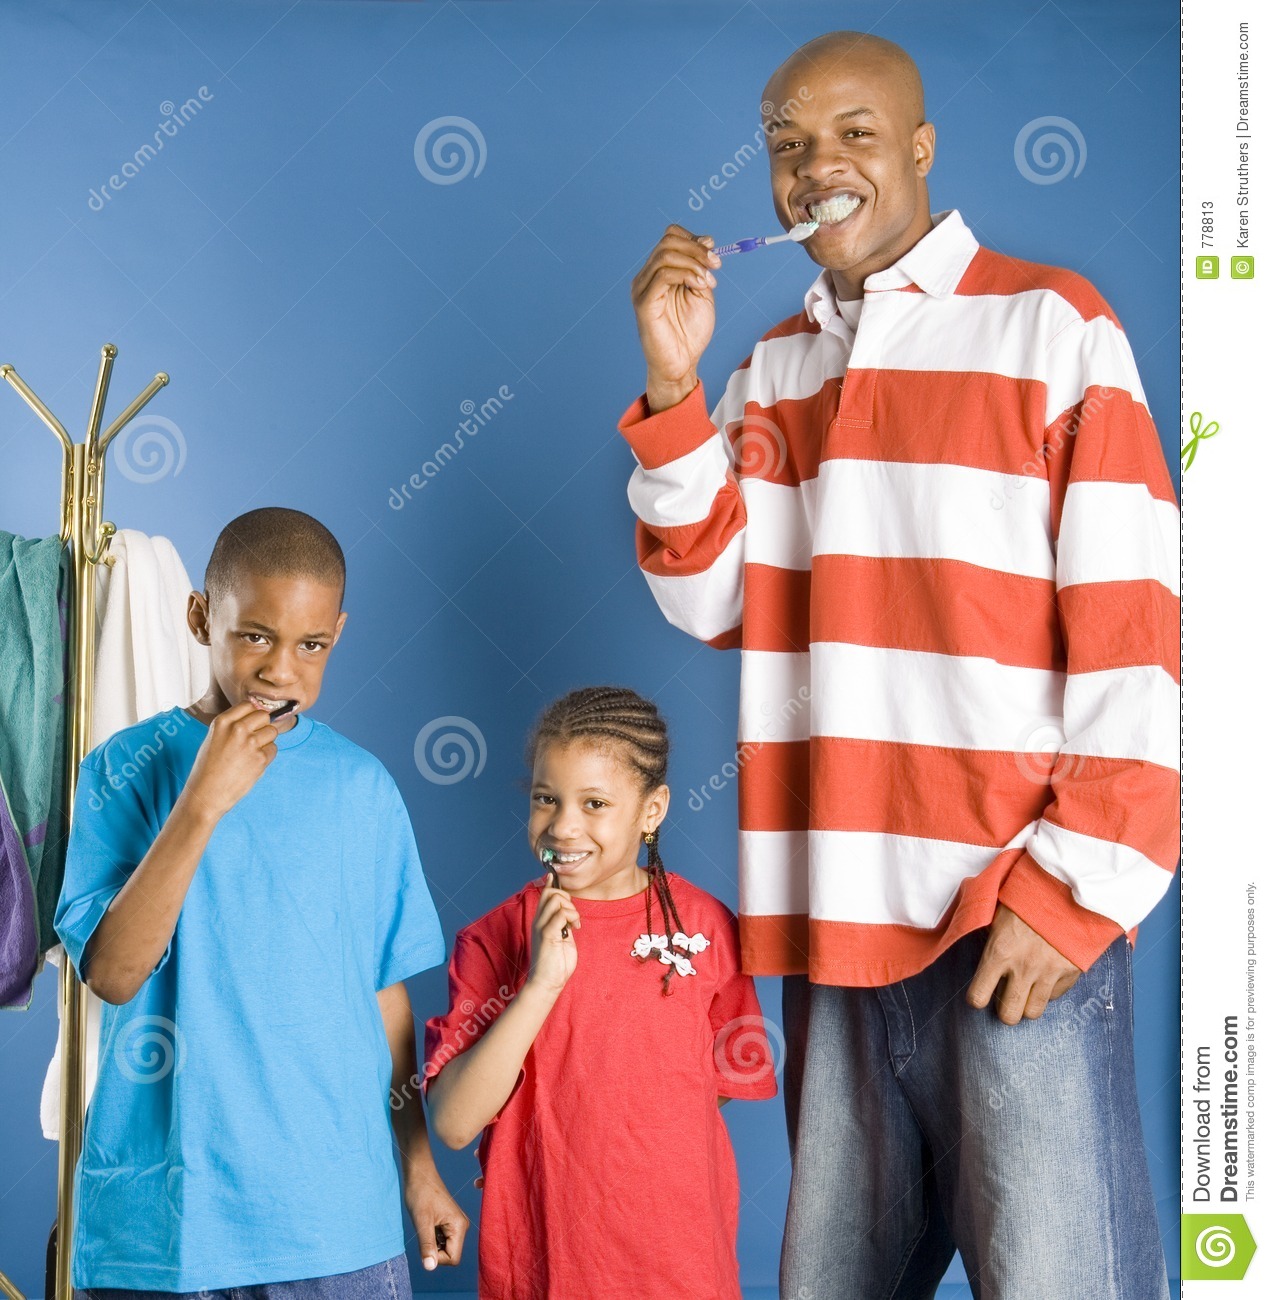 Happy Family Cleaning Teeth Stock Photos   Image  778813